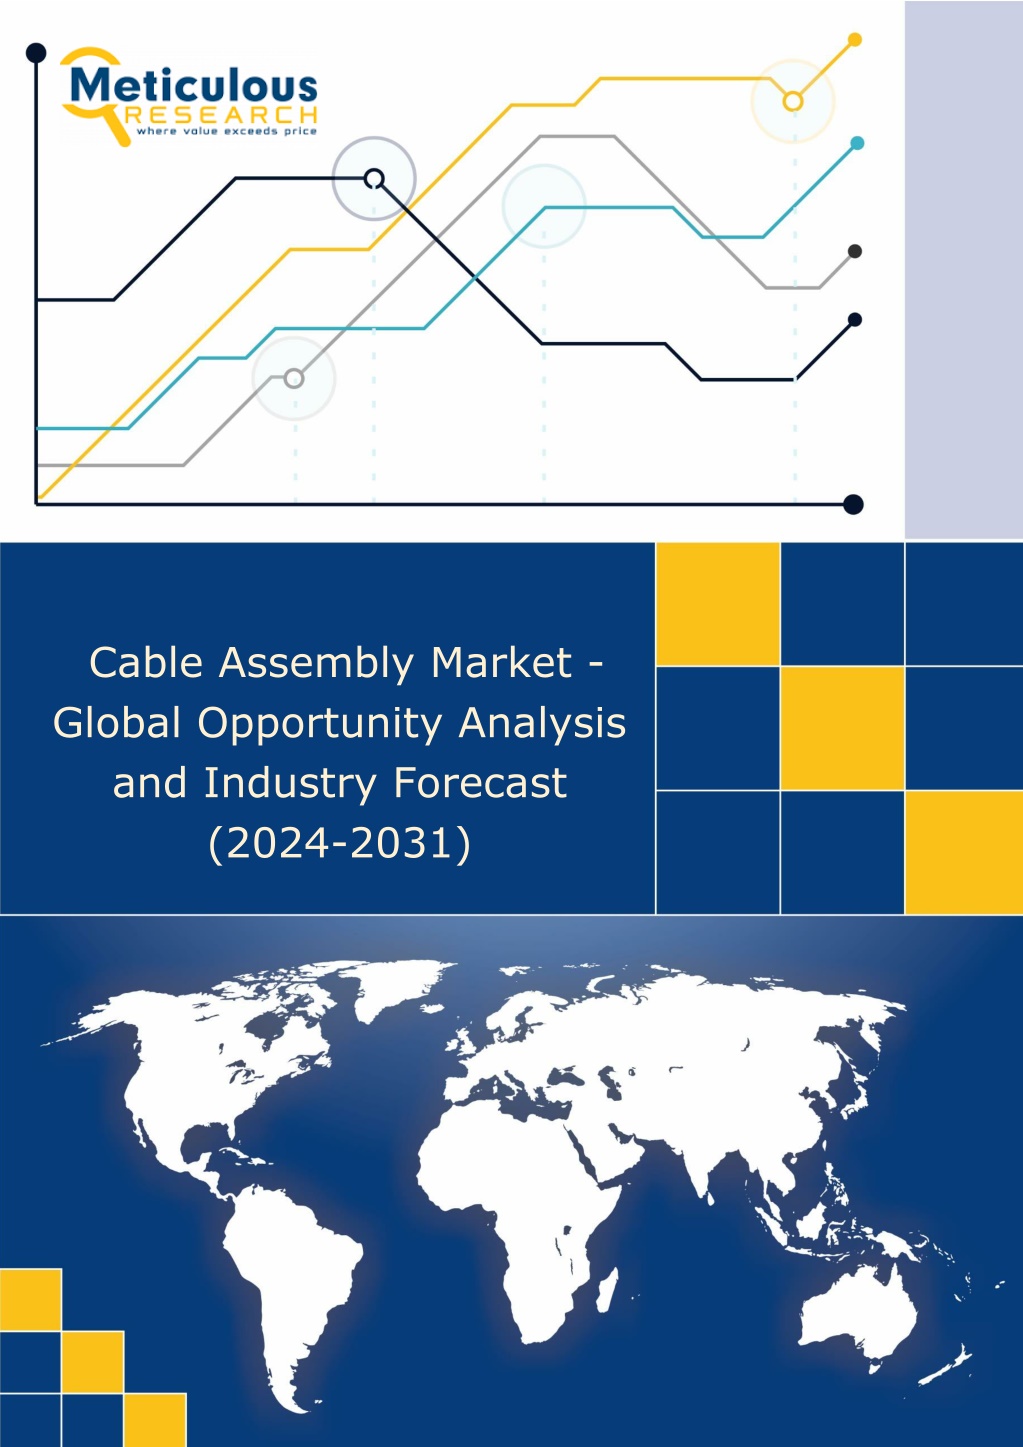 cable assembly market global opportunity analysis l.w